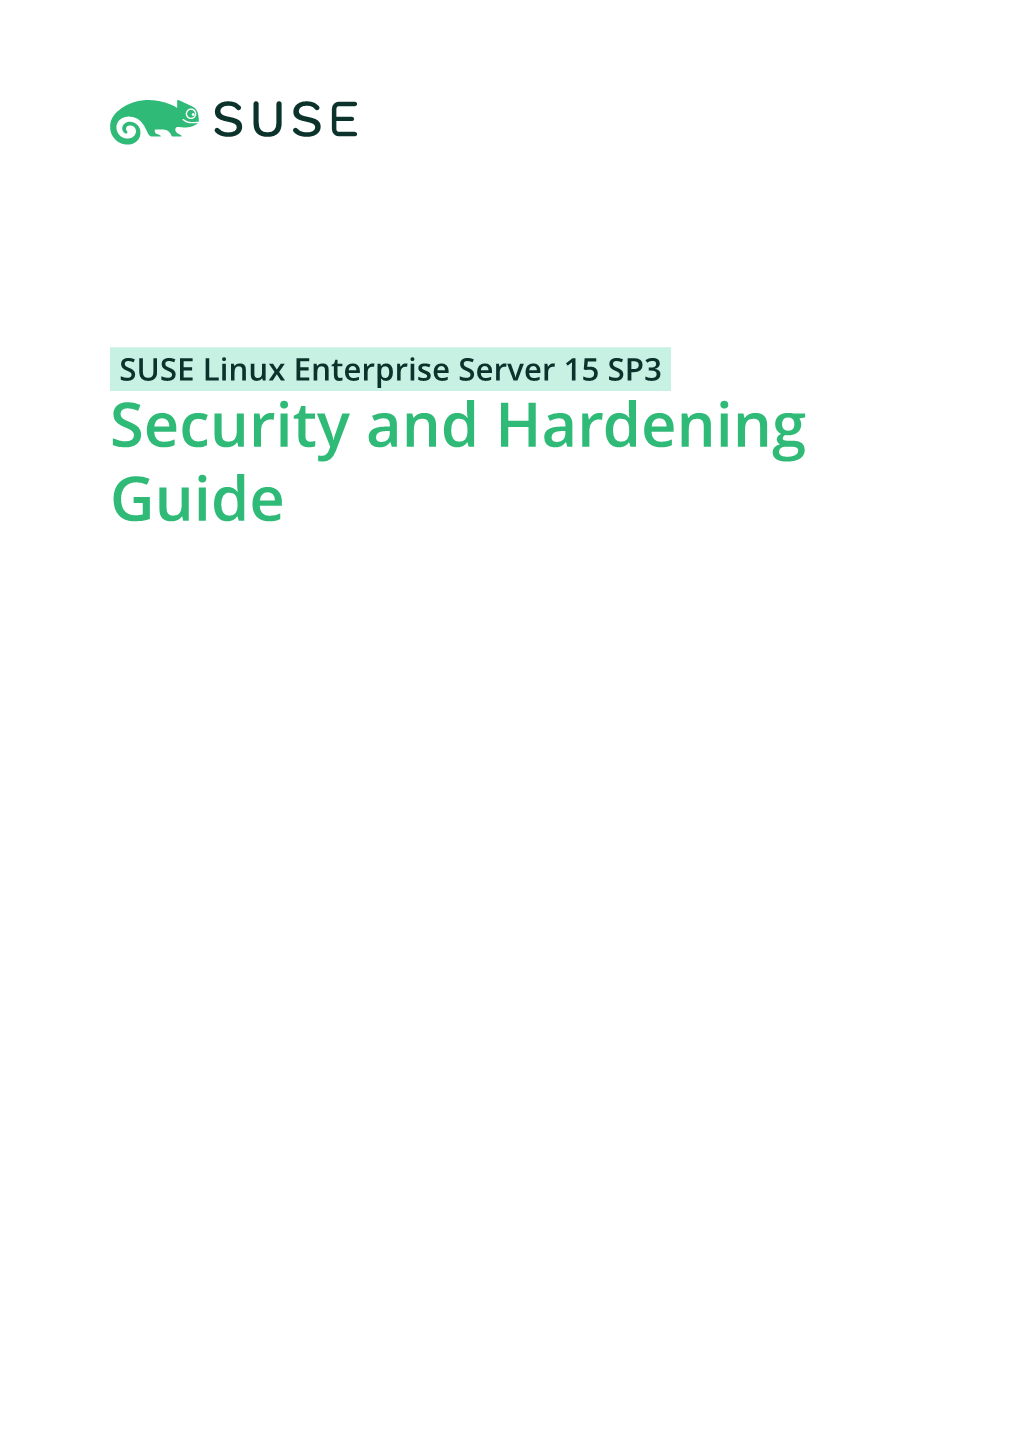 Security and Hardening Guide Security and Hardening Guide SUSE Linux Enterprise Server 15 SP3